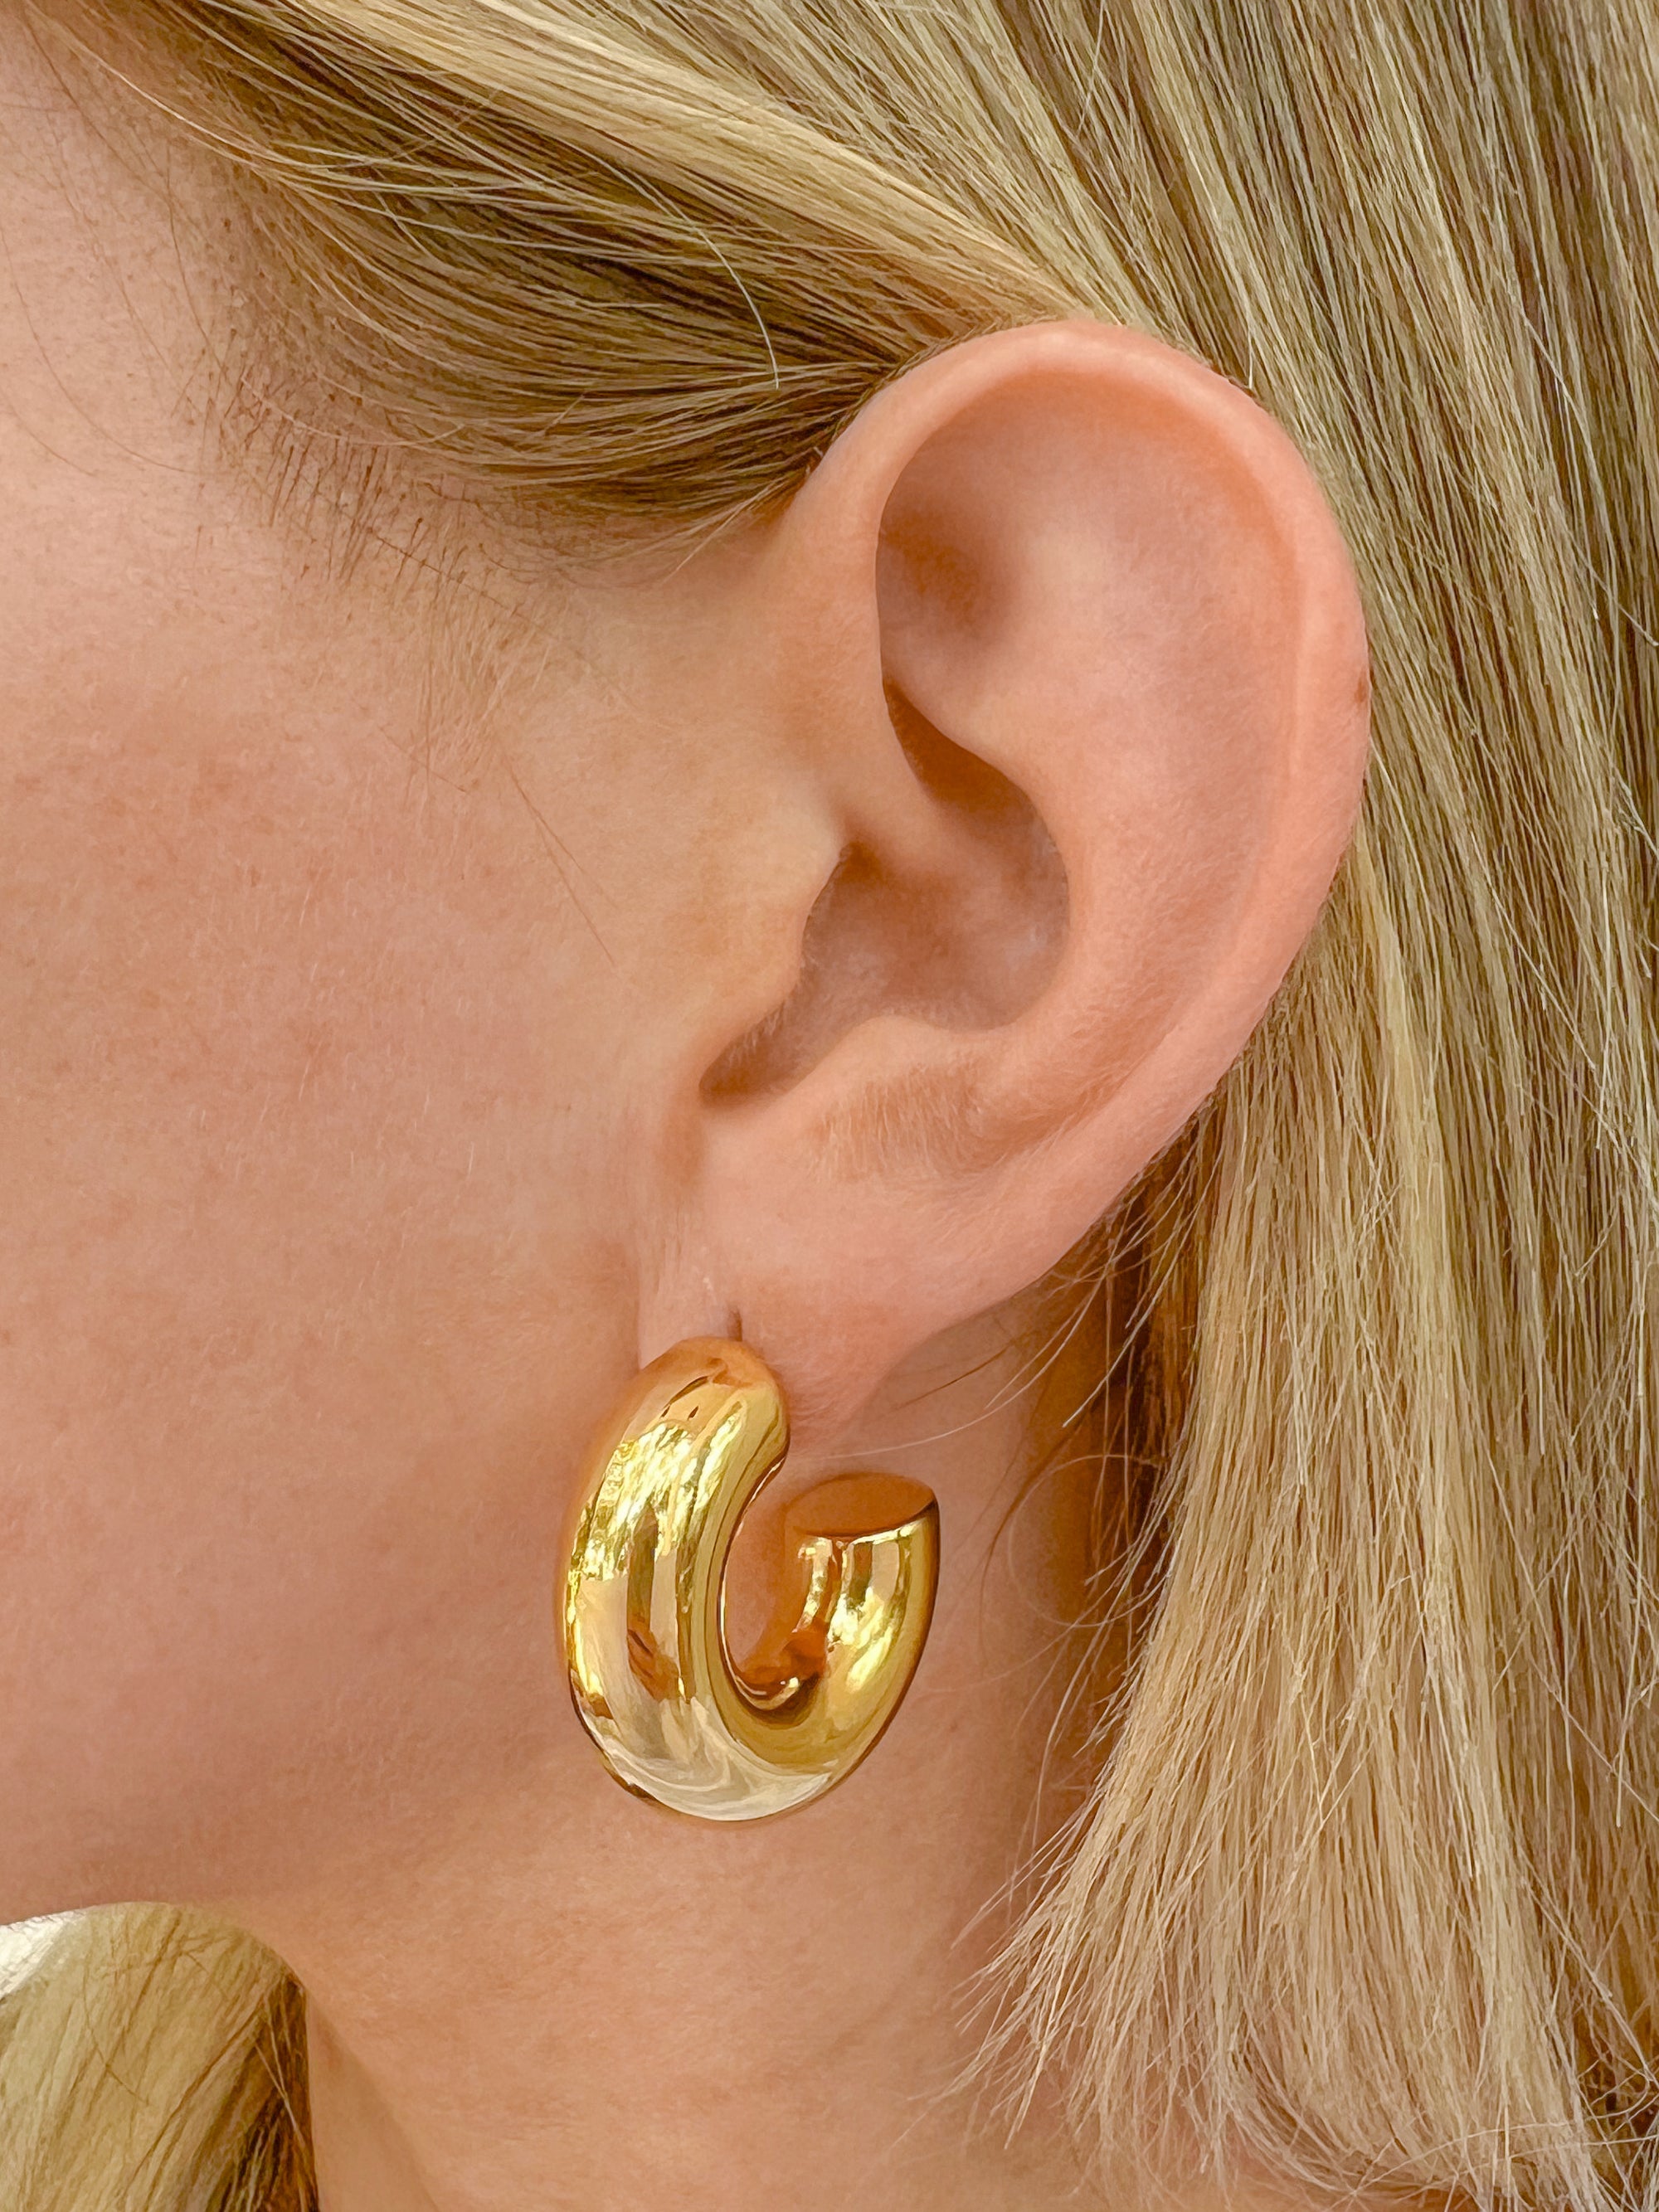 Statement hoops - For the Girls Jewelry